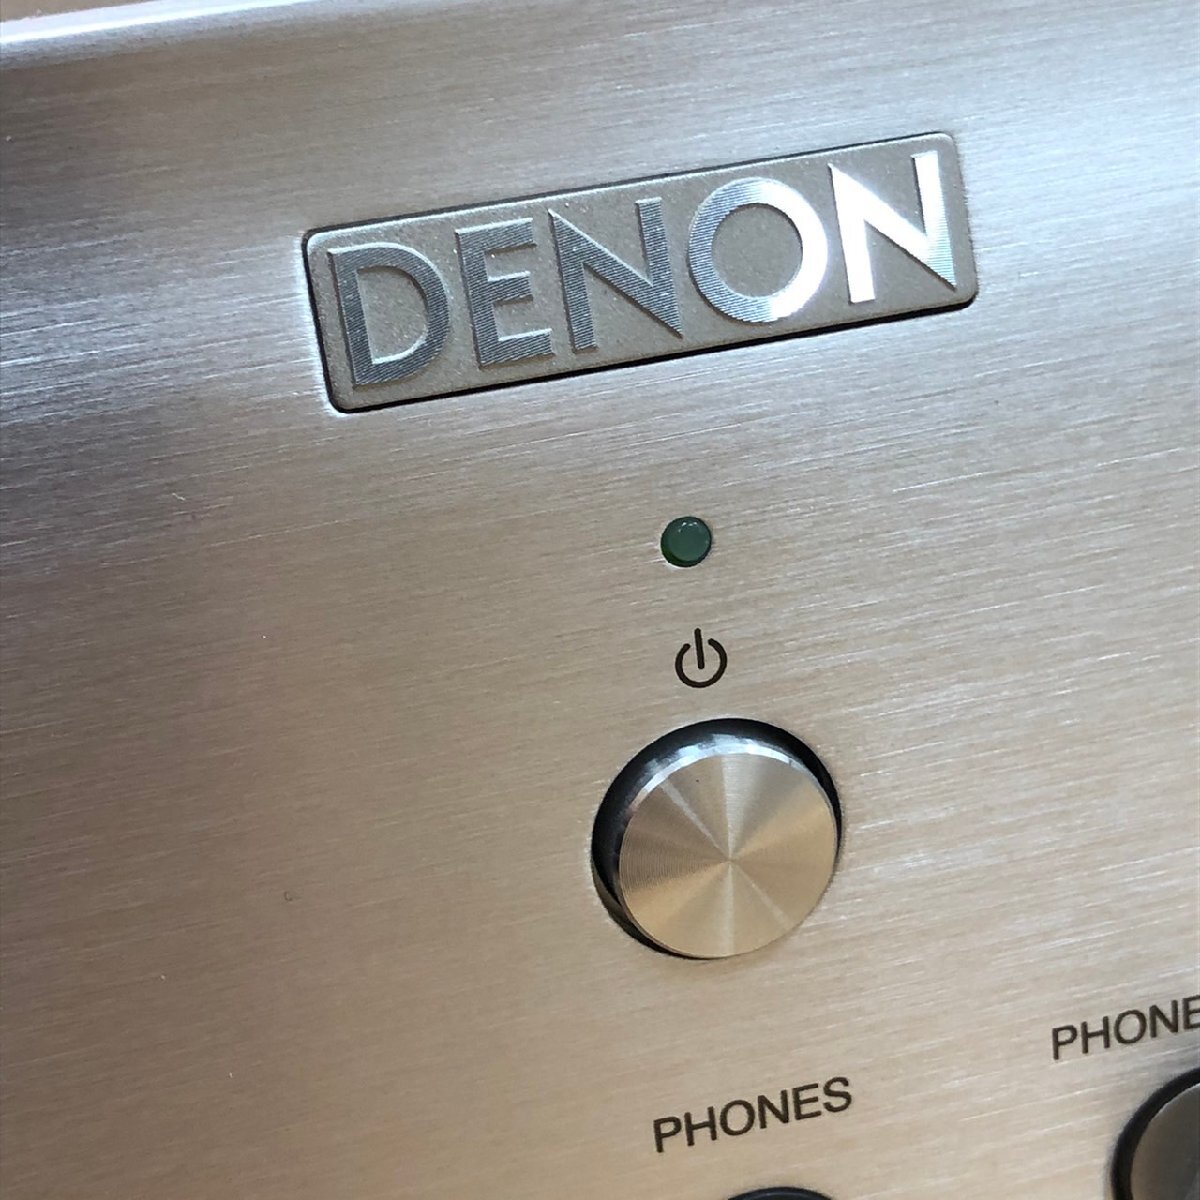 * DENON Denon DCD-755RE CD deck CD player 2019 year made player start-up has confirmed 